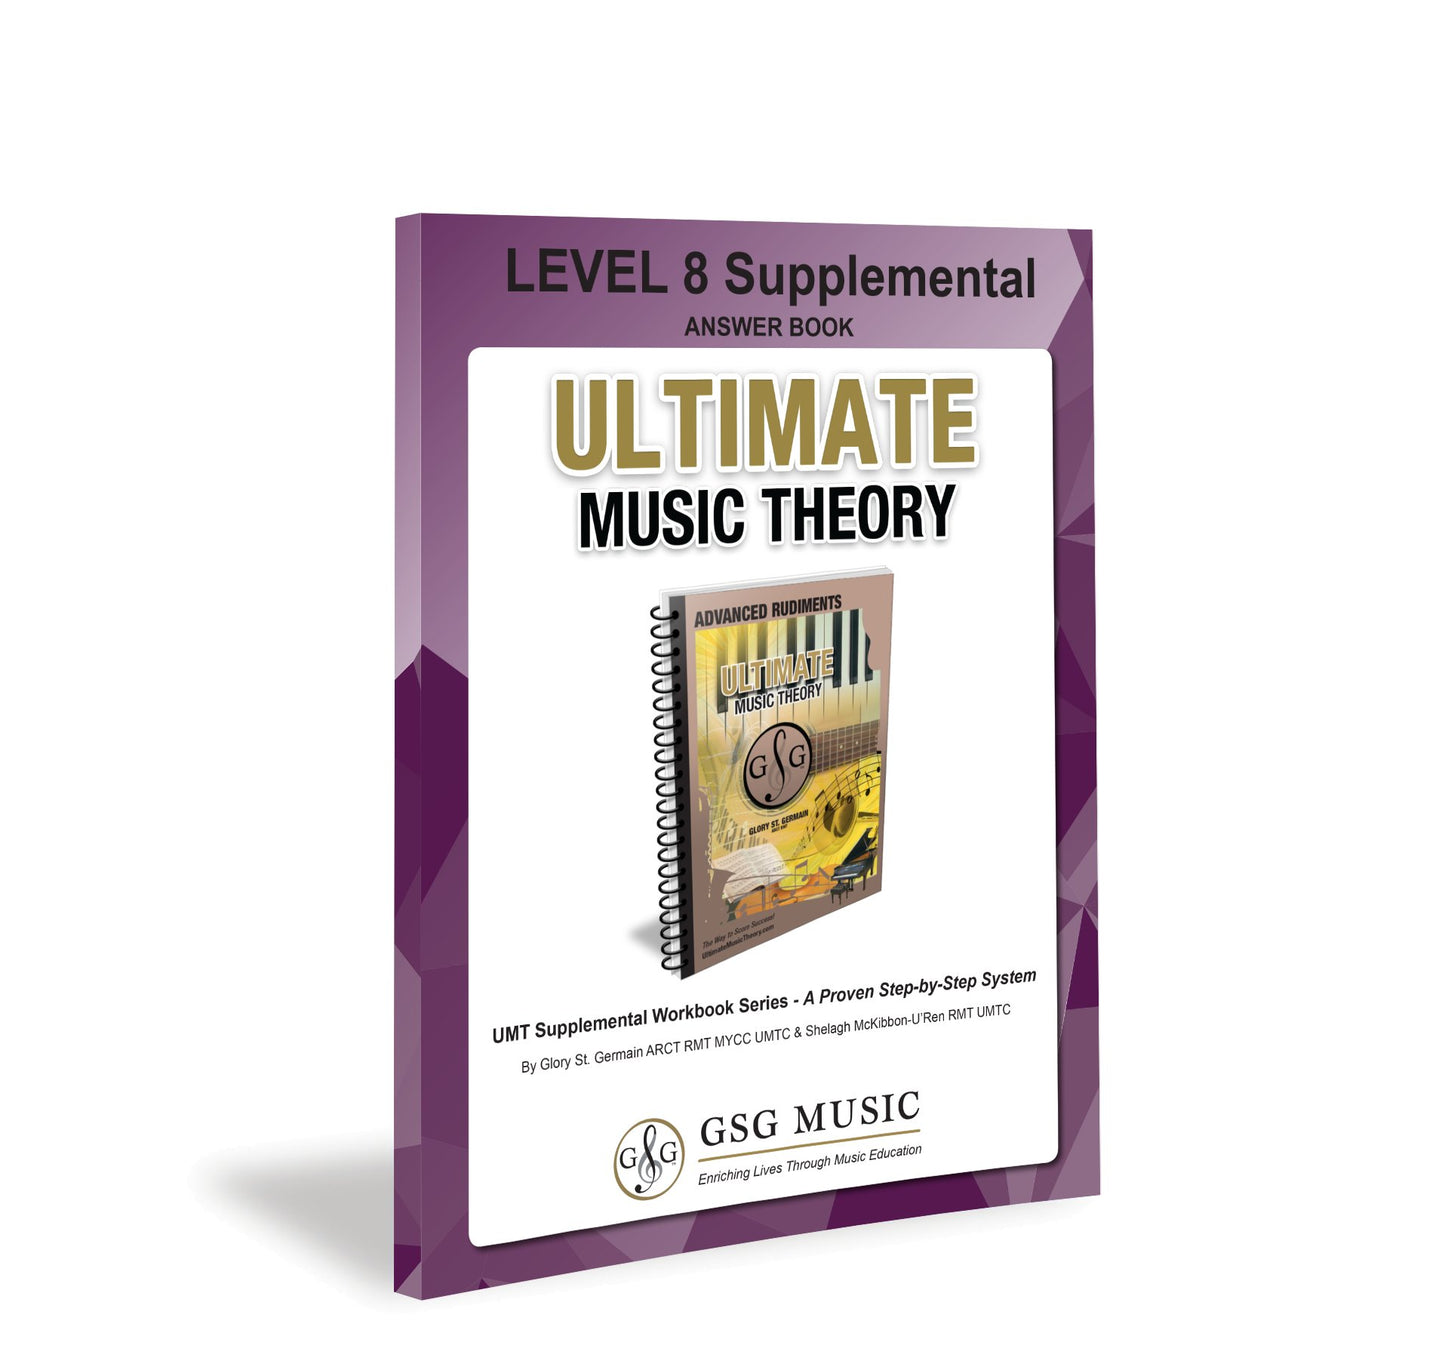 Ultimate Music Theory Level 8 Supplemental Answer Book